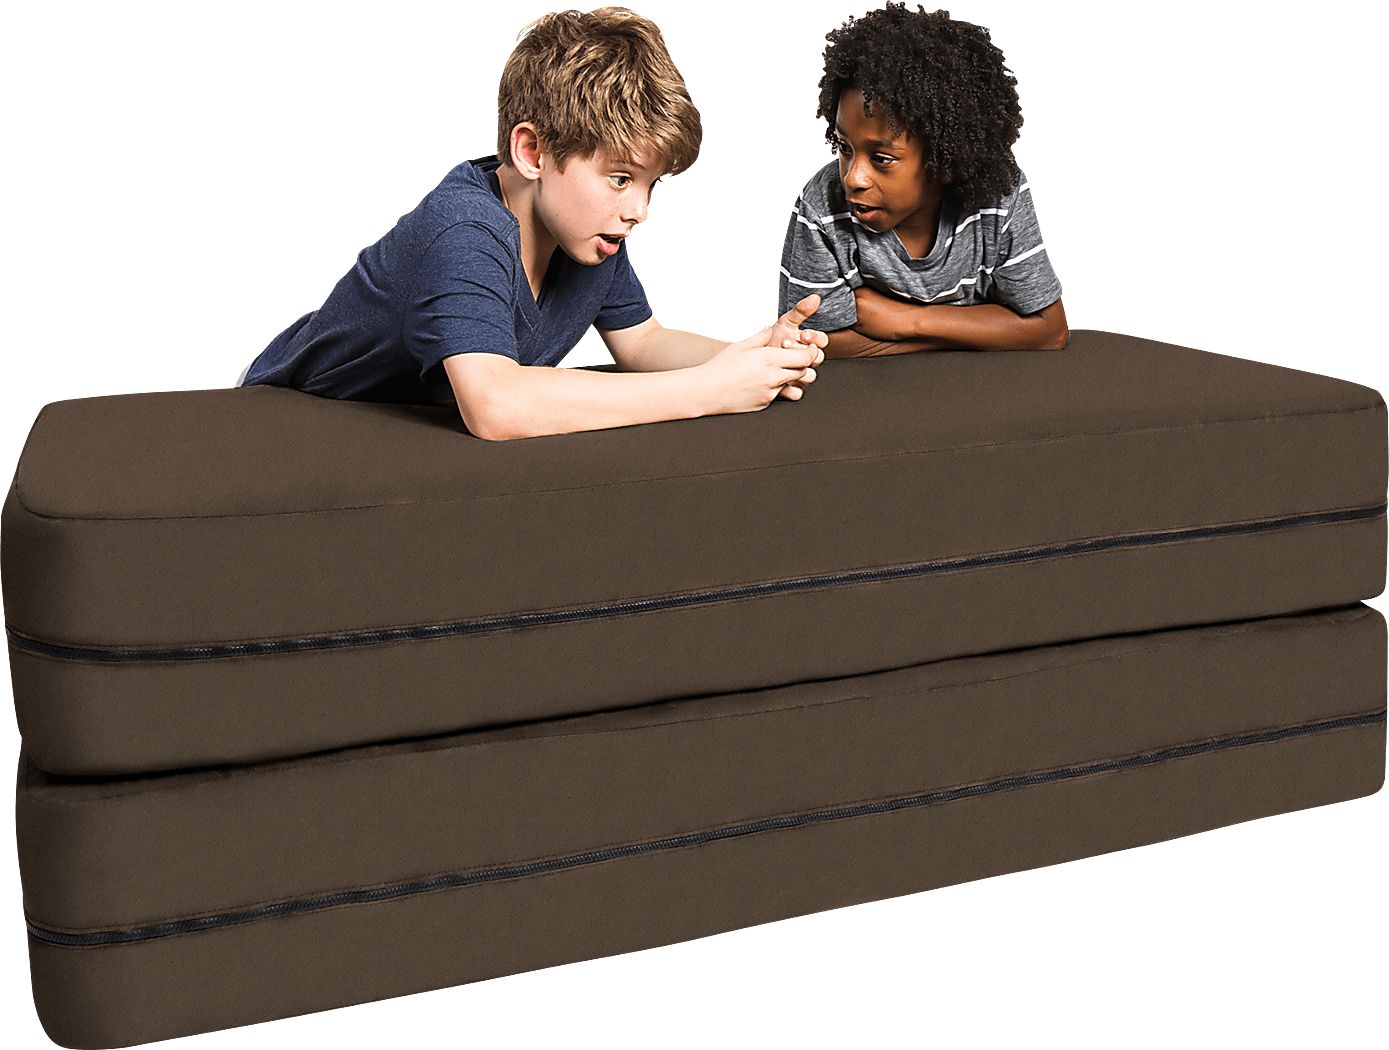 Kids Cubex Brown Convertible Sofa and Ottoman